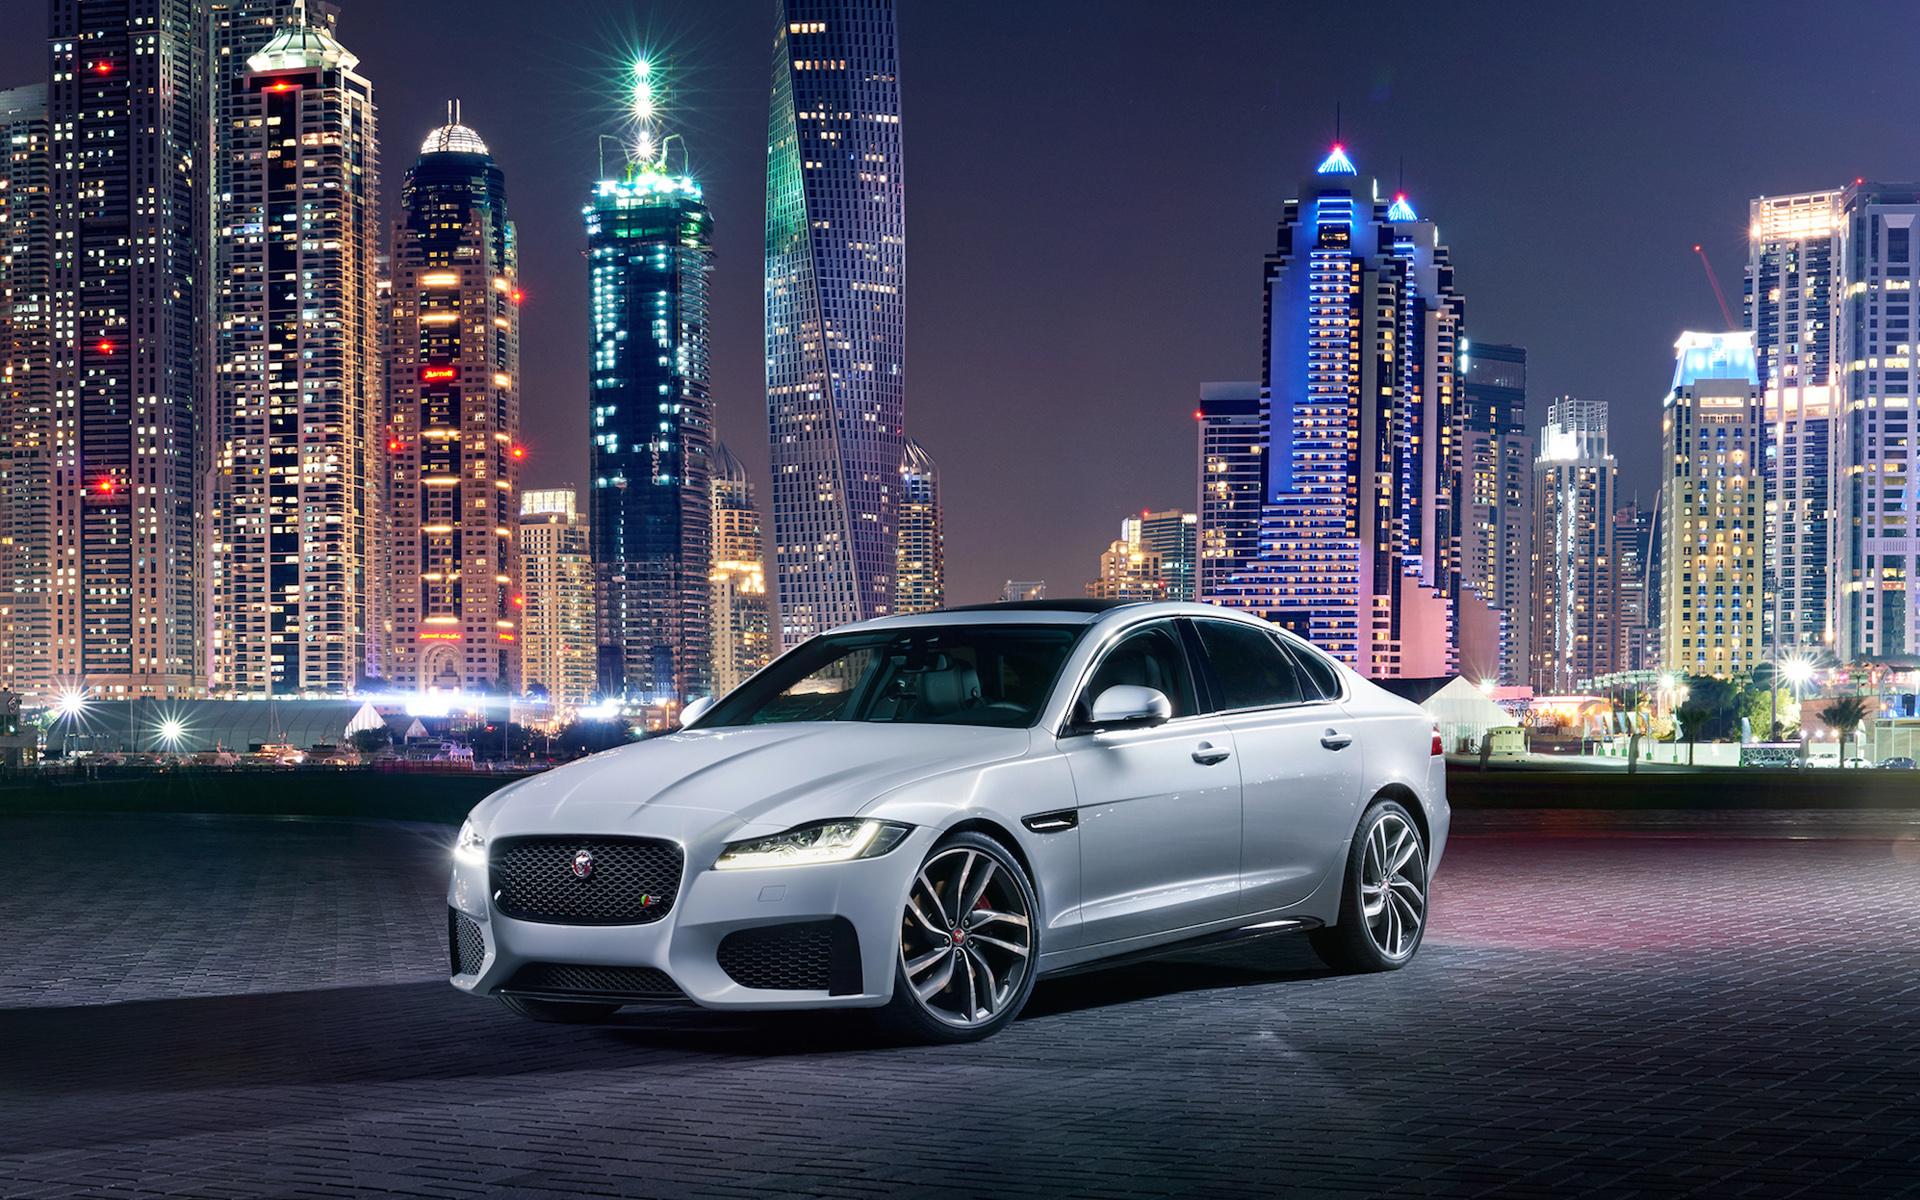 Free Download Jaguar Xf Wallpaper Image Group 44 1920x1200 For Images, Photos, Reviews